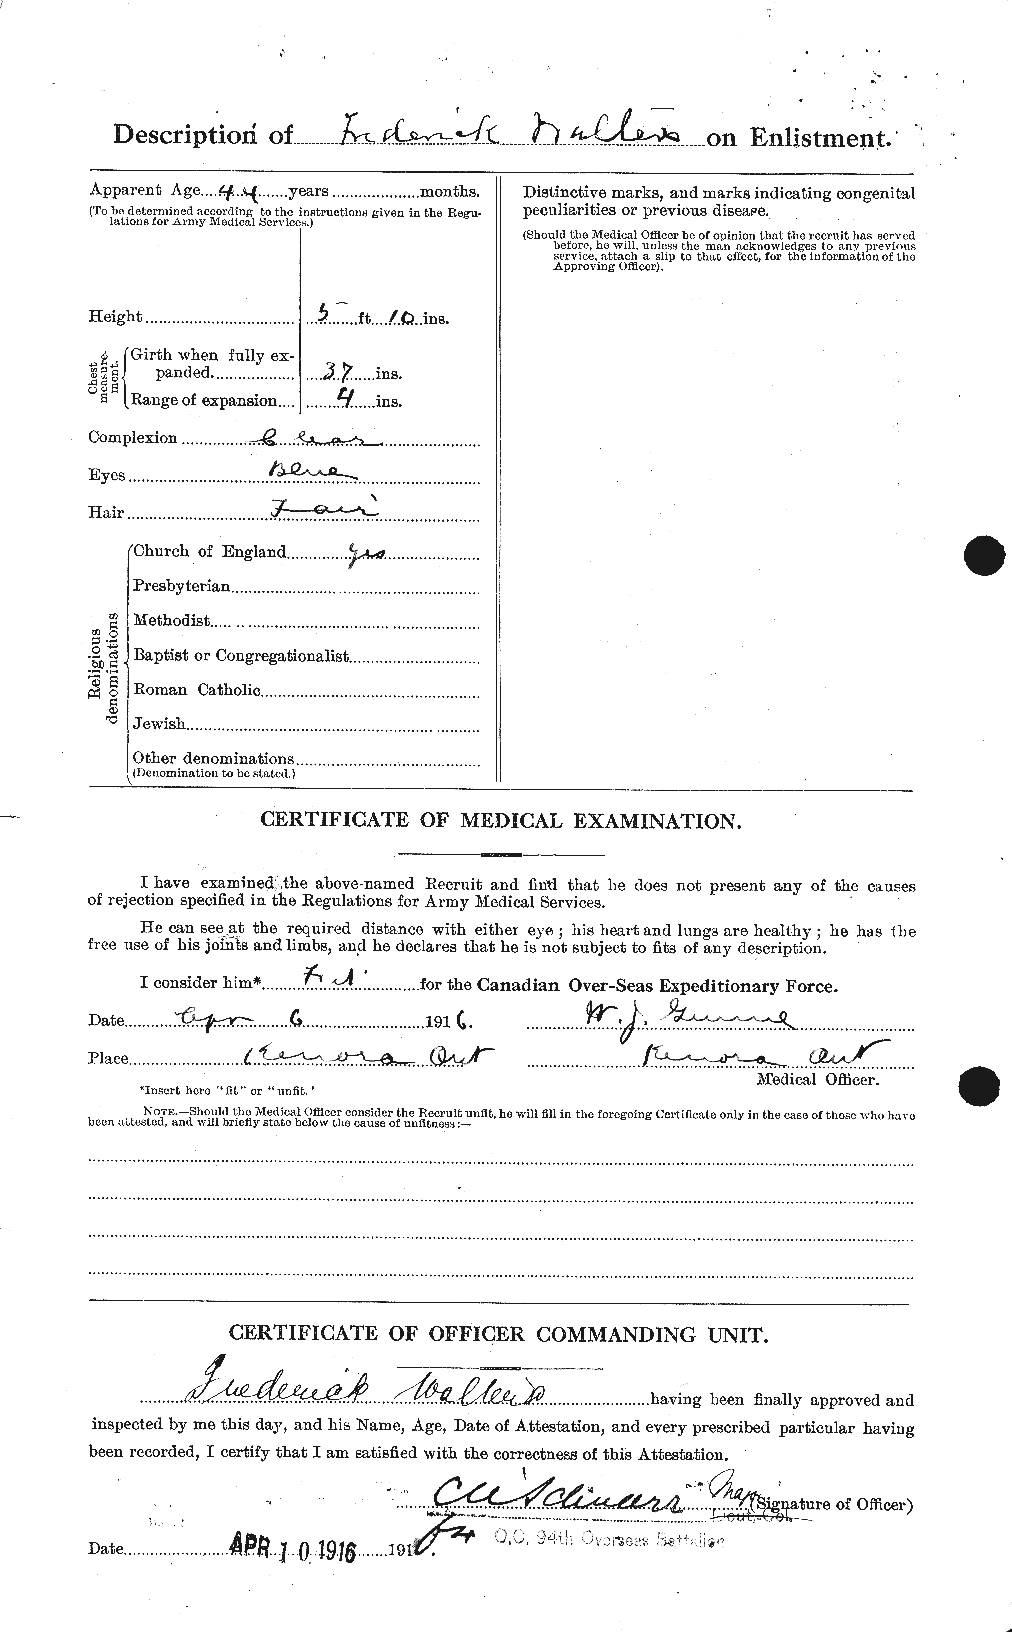 Personnel Records of the First World War - CEF 655345b